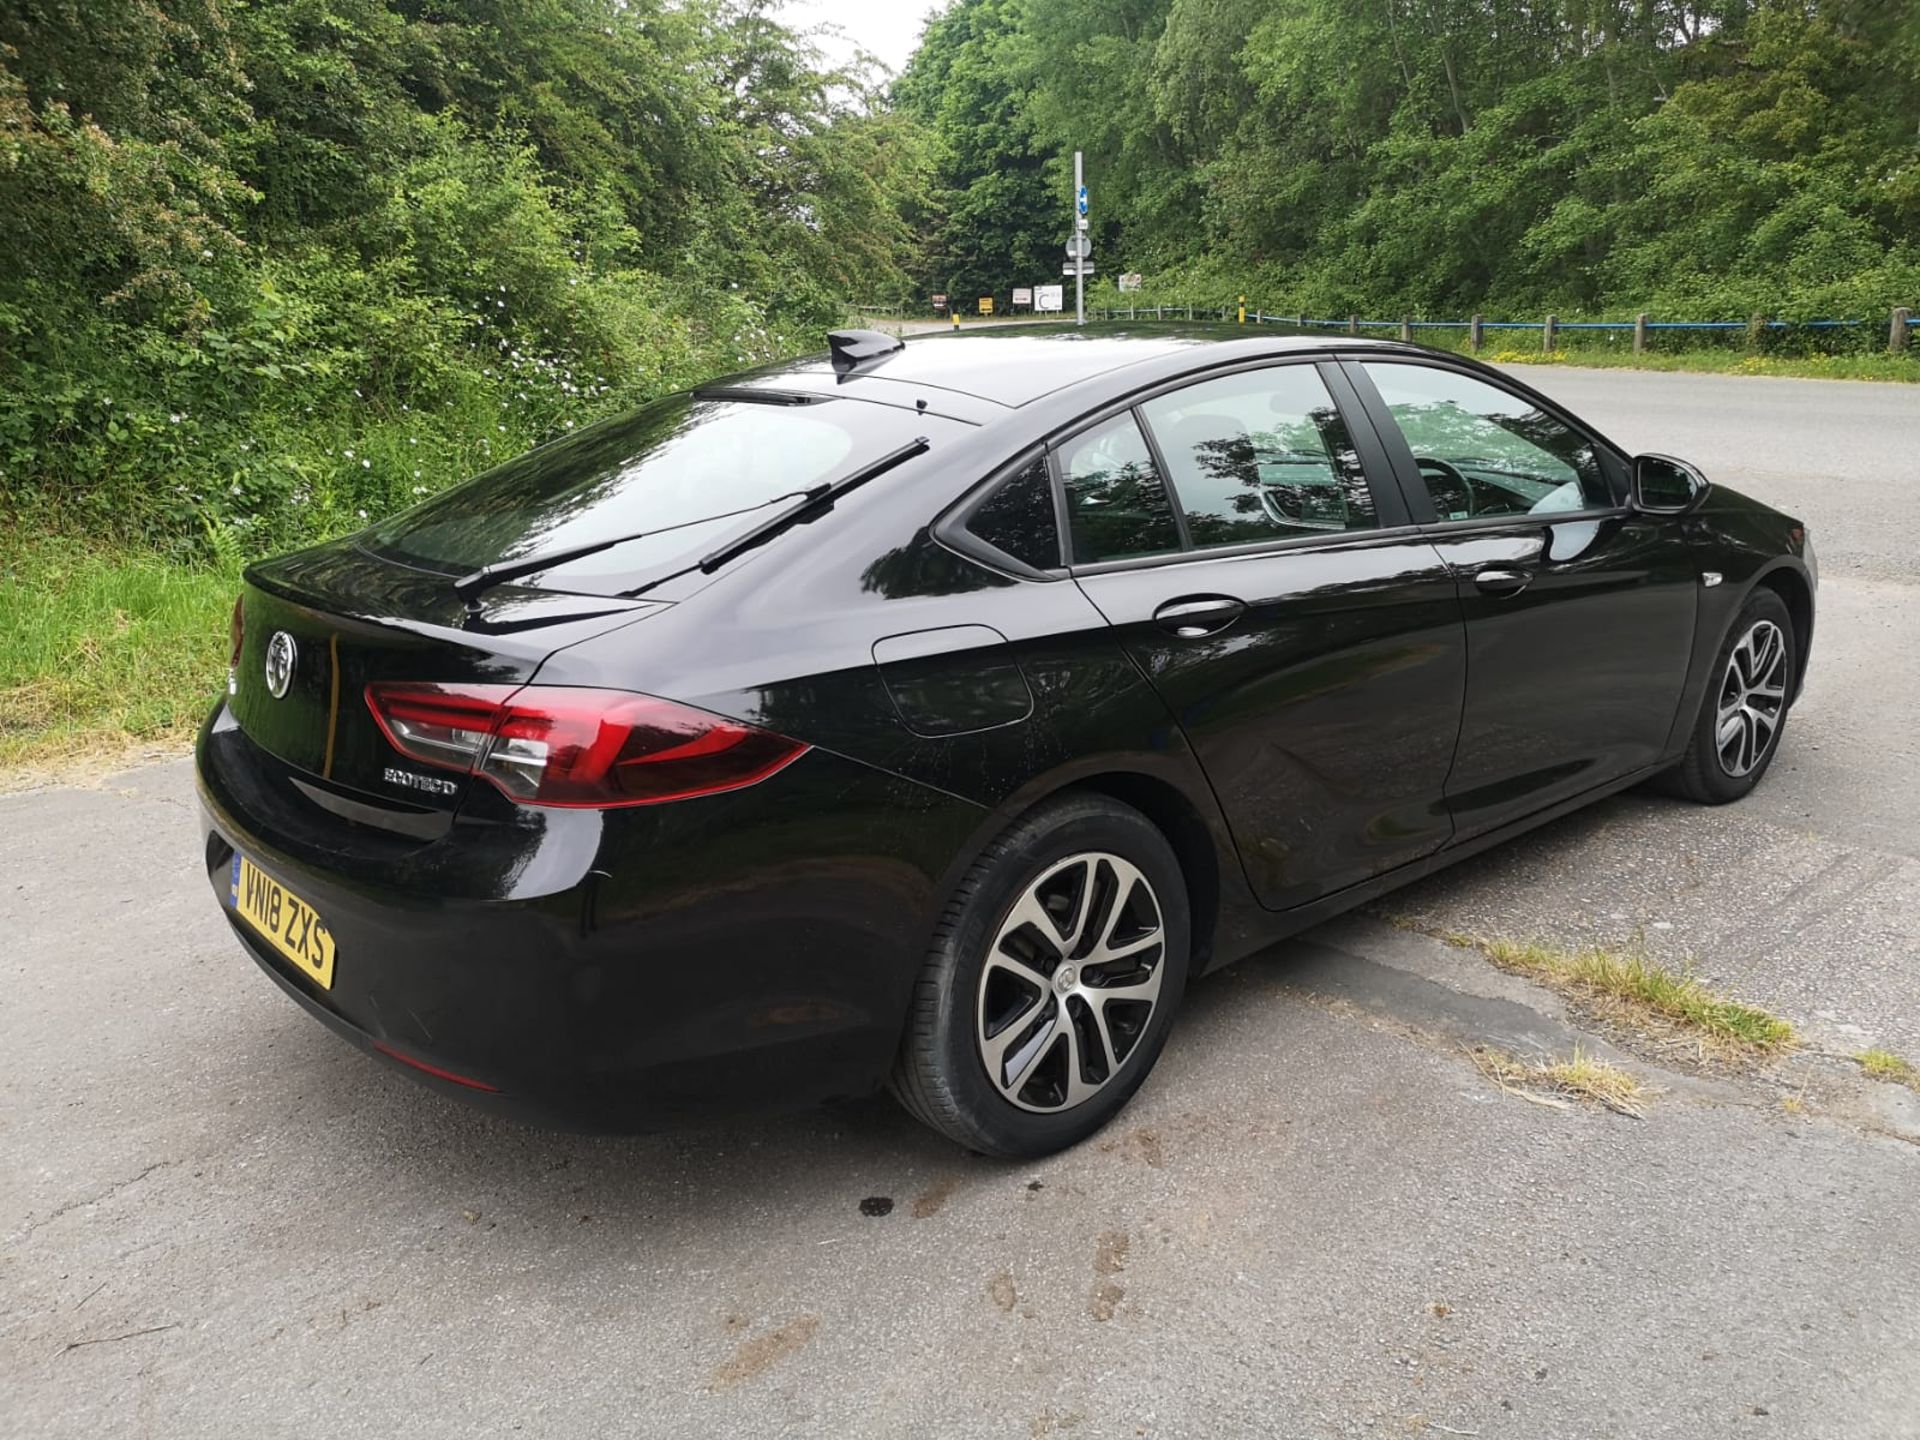 2018/18 REG VAUXHALL INSIGNIA DESIGN ECOTEC TURBO 1.6 DIESEL, SHOWING 0 FORMER KEEPERS *NO VAT* - Image 8 of 16